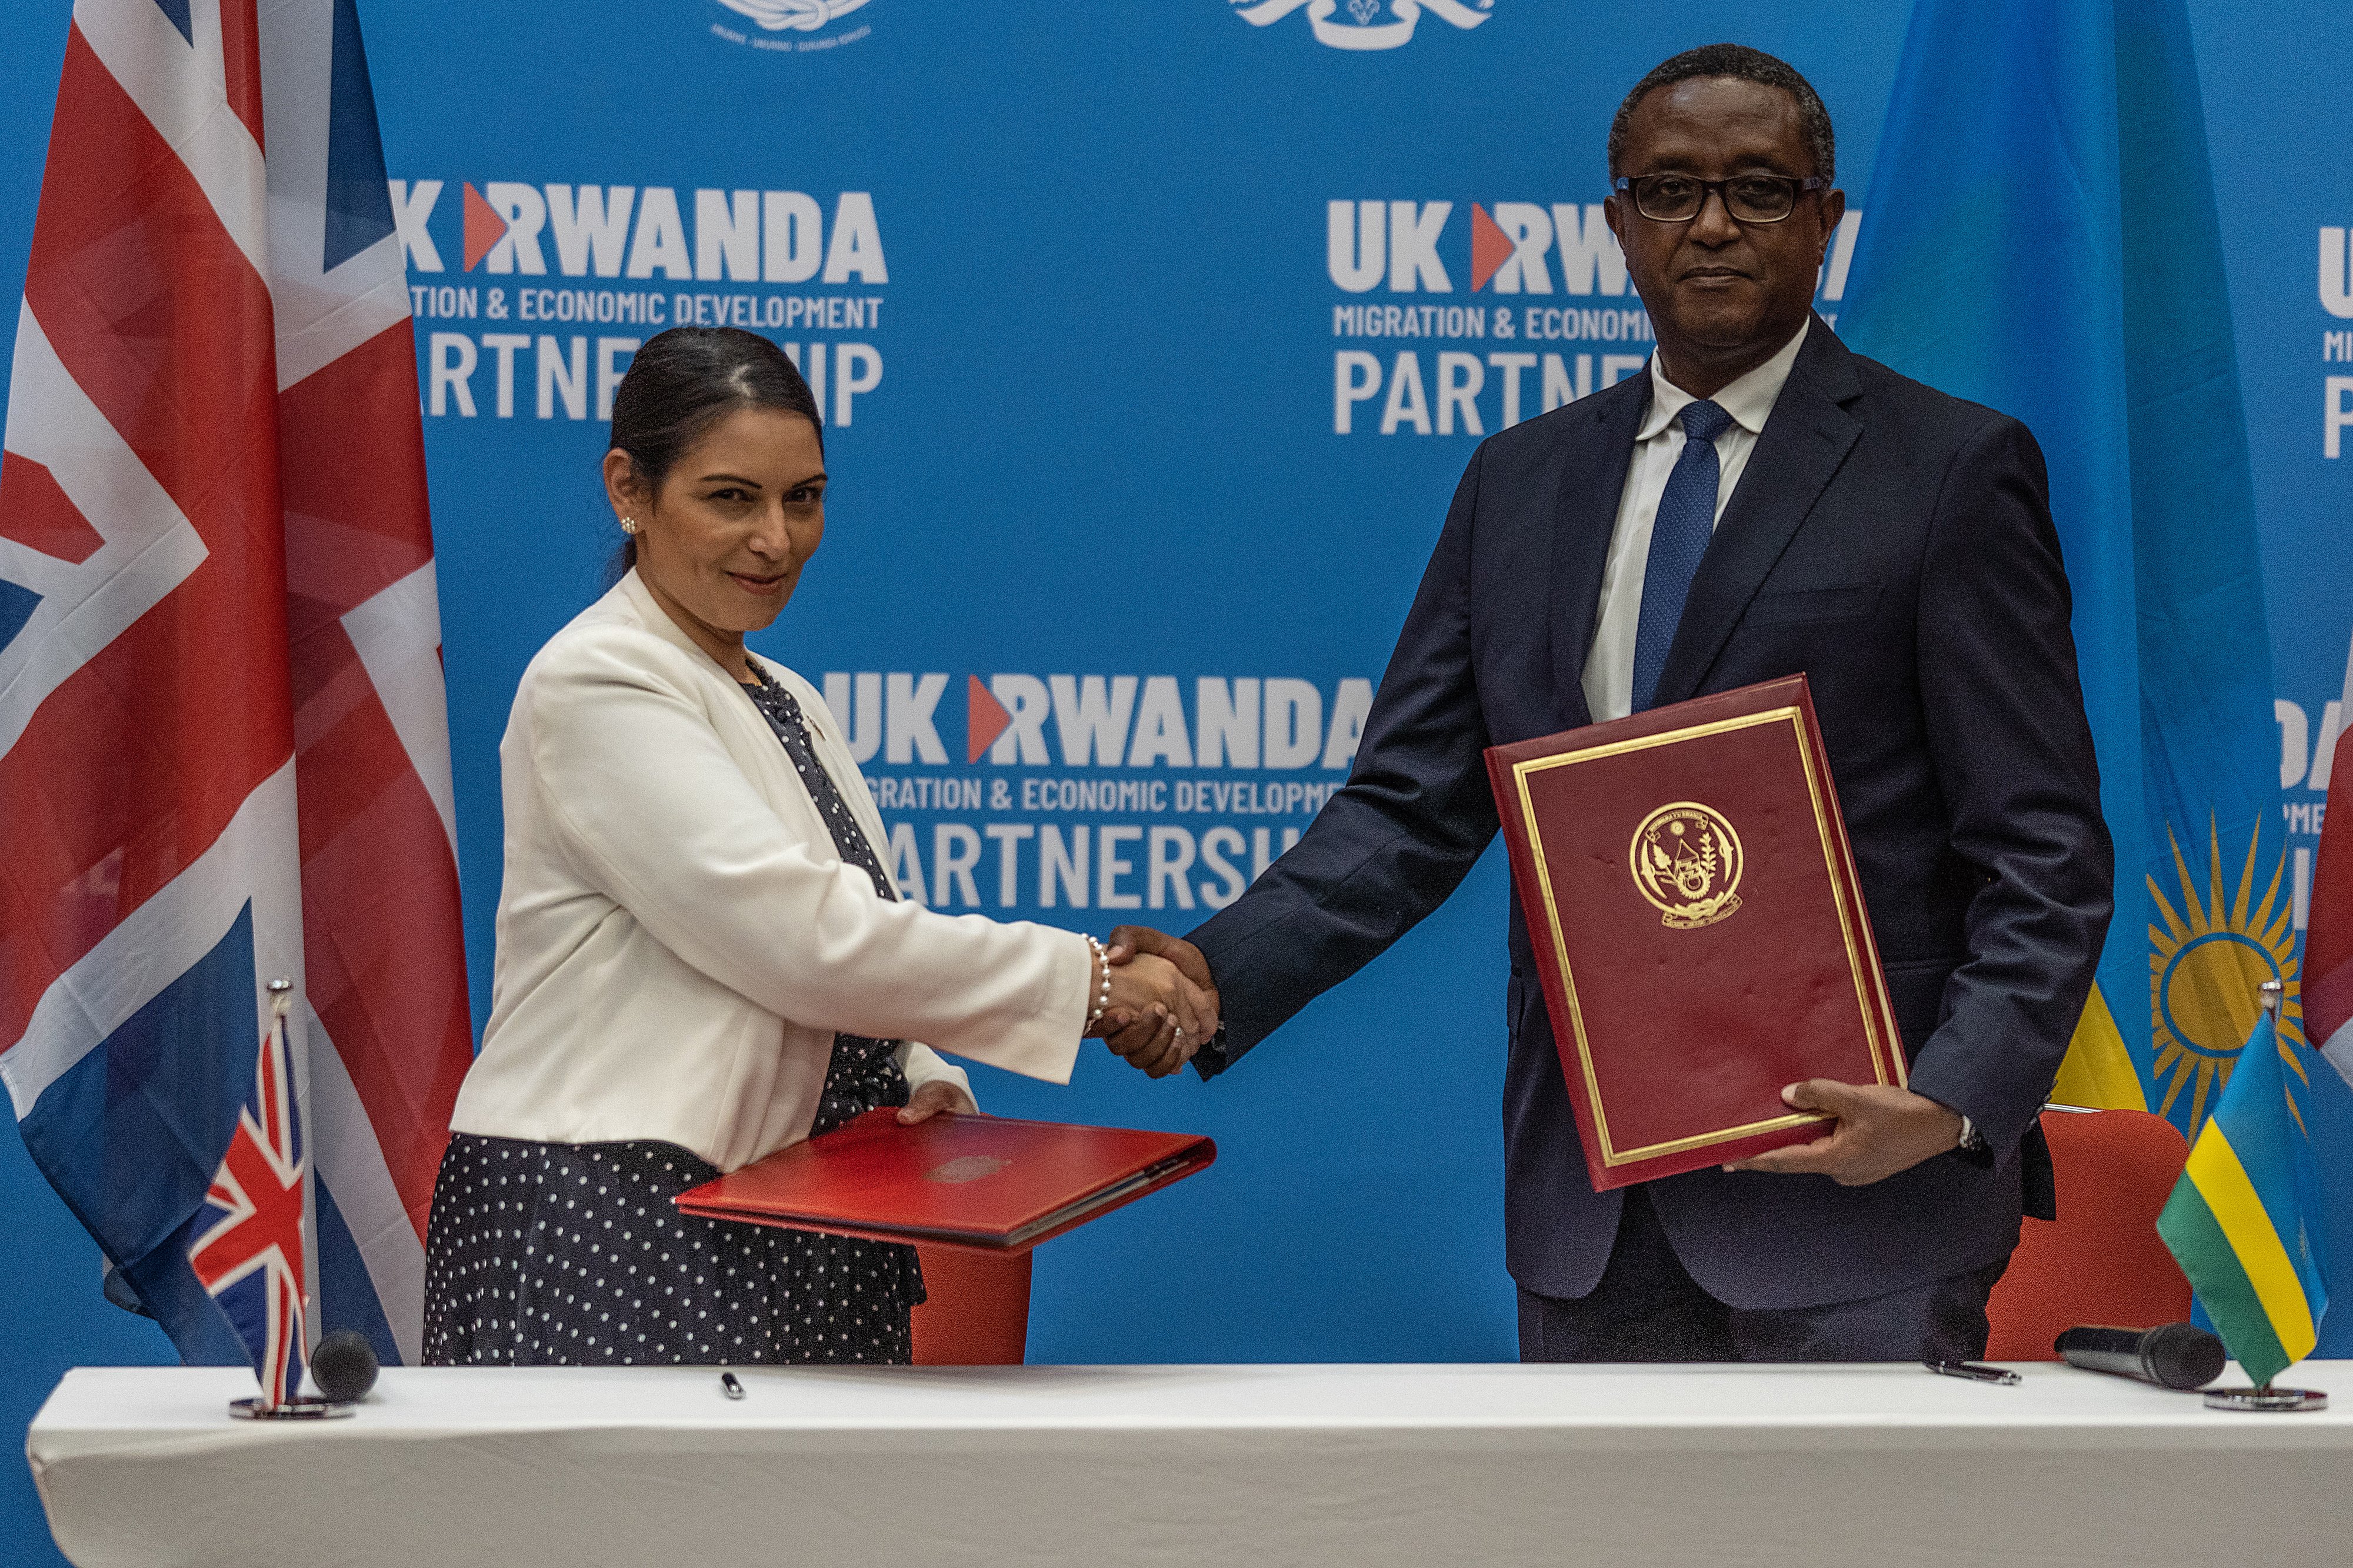 British Home Secretary Priti Patel (L), and Rwandan Minister of Foreign Affairs and International Cooperation Vincent Biruta, shake hands after signing an agreement at Kigali Convention Center, Kigali, Rwanda on April 14, 2022.